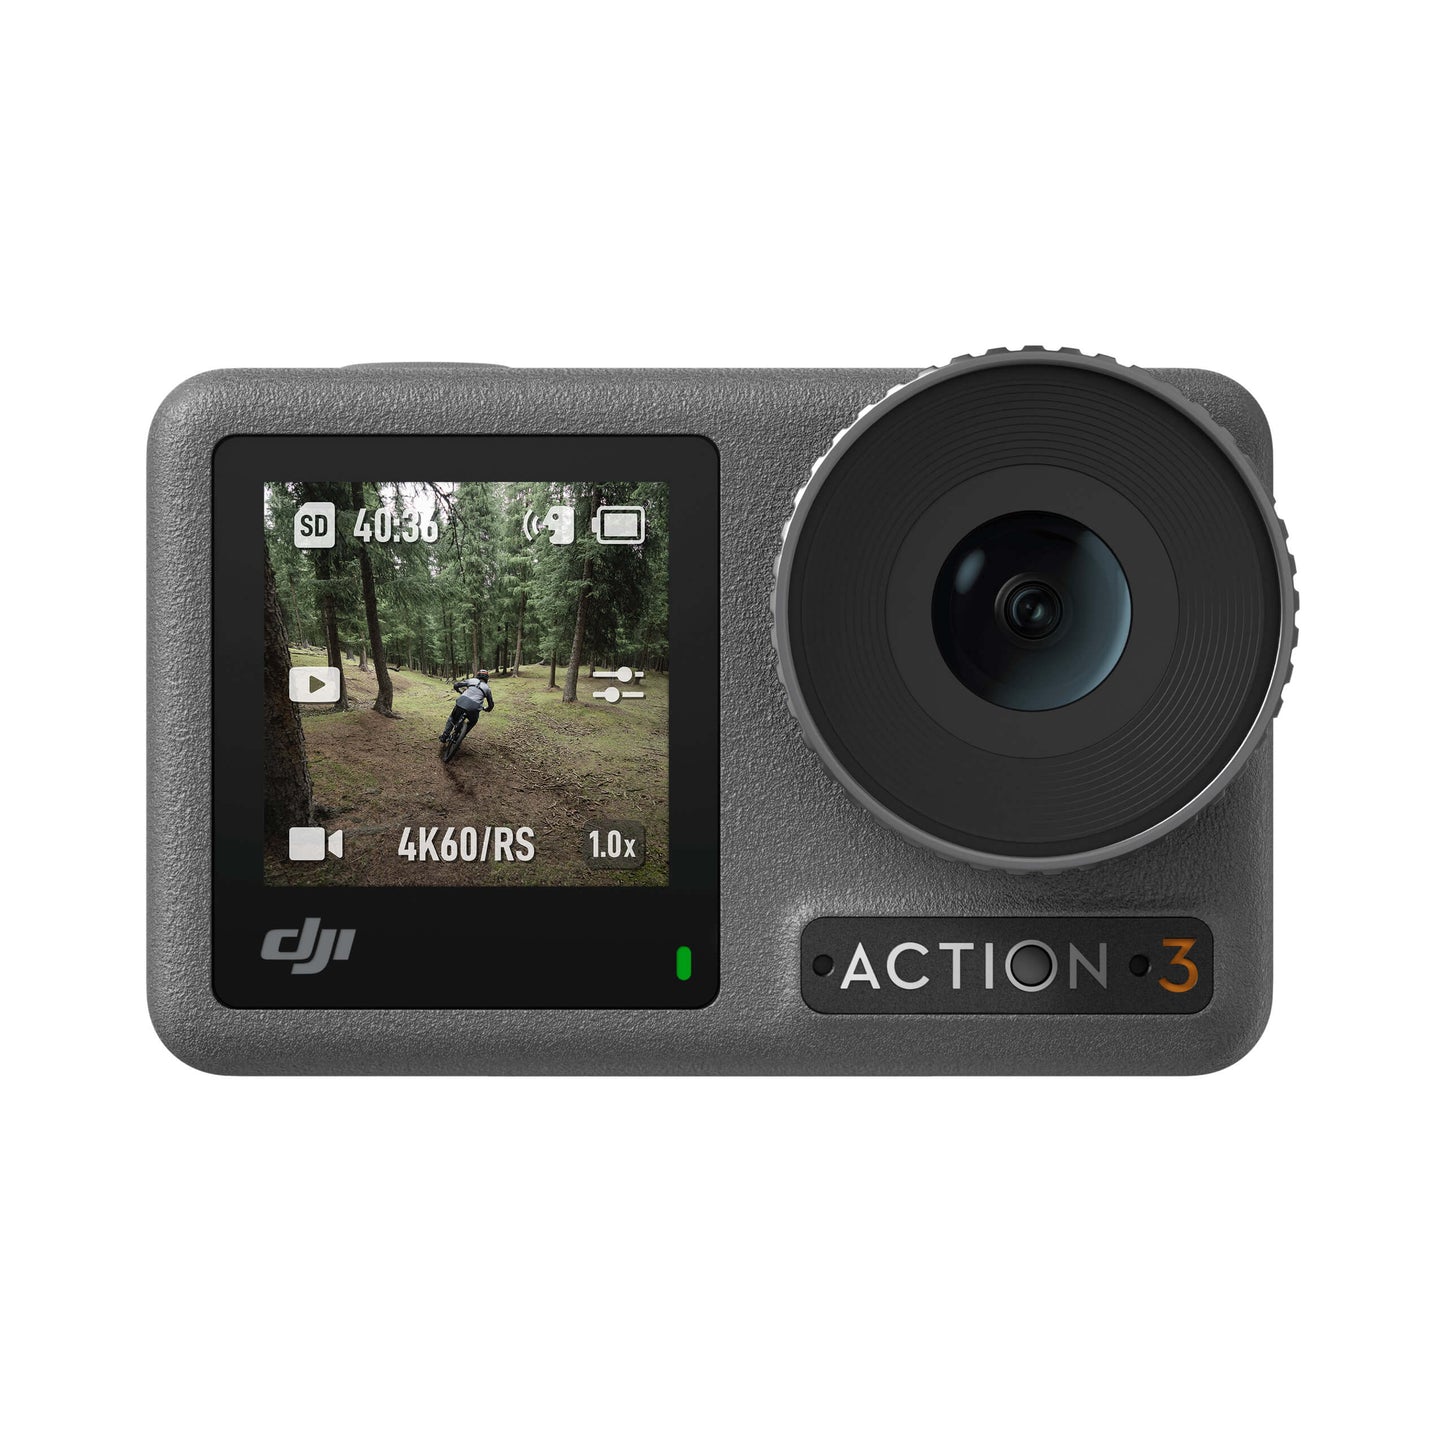 DJI Osmo Action 3 4K 120Hz Sports Camera with Cold Resistance Waterproof for Up to 16M Super Wide FOV Lens and Built-in Image Stabilization for Outdoor Videography and Vlogging (Standard and Adventure Pack Available)